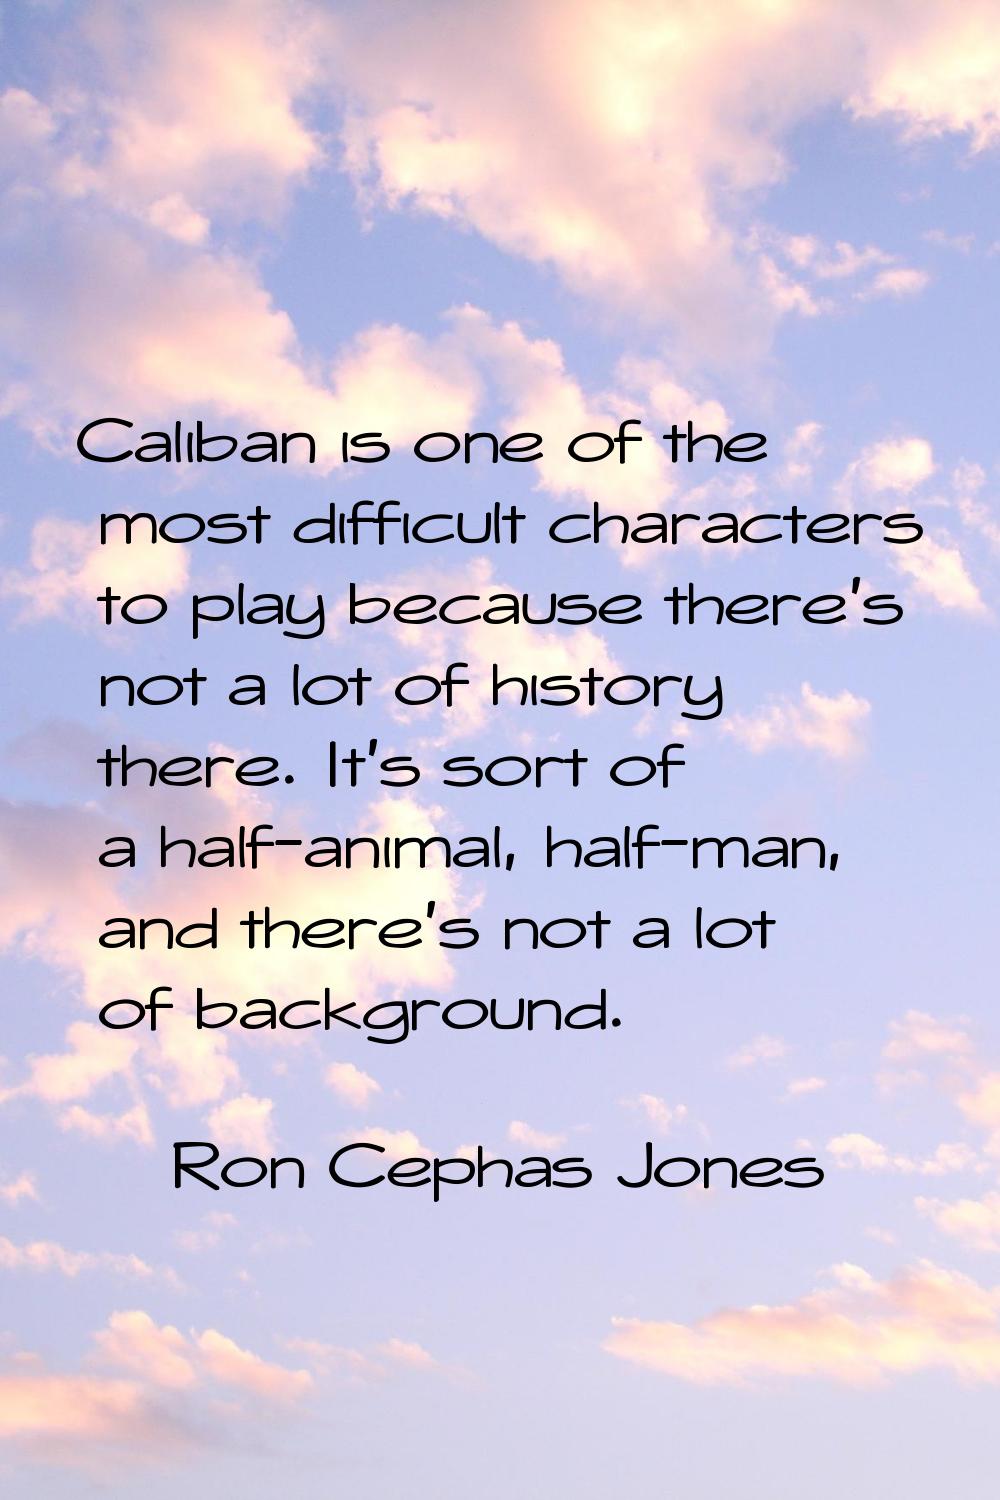 Caliban is one of the most difficult characters to play because there's not a lot of history there.